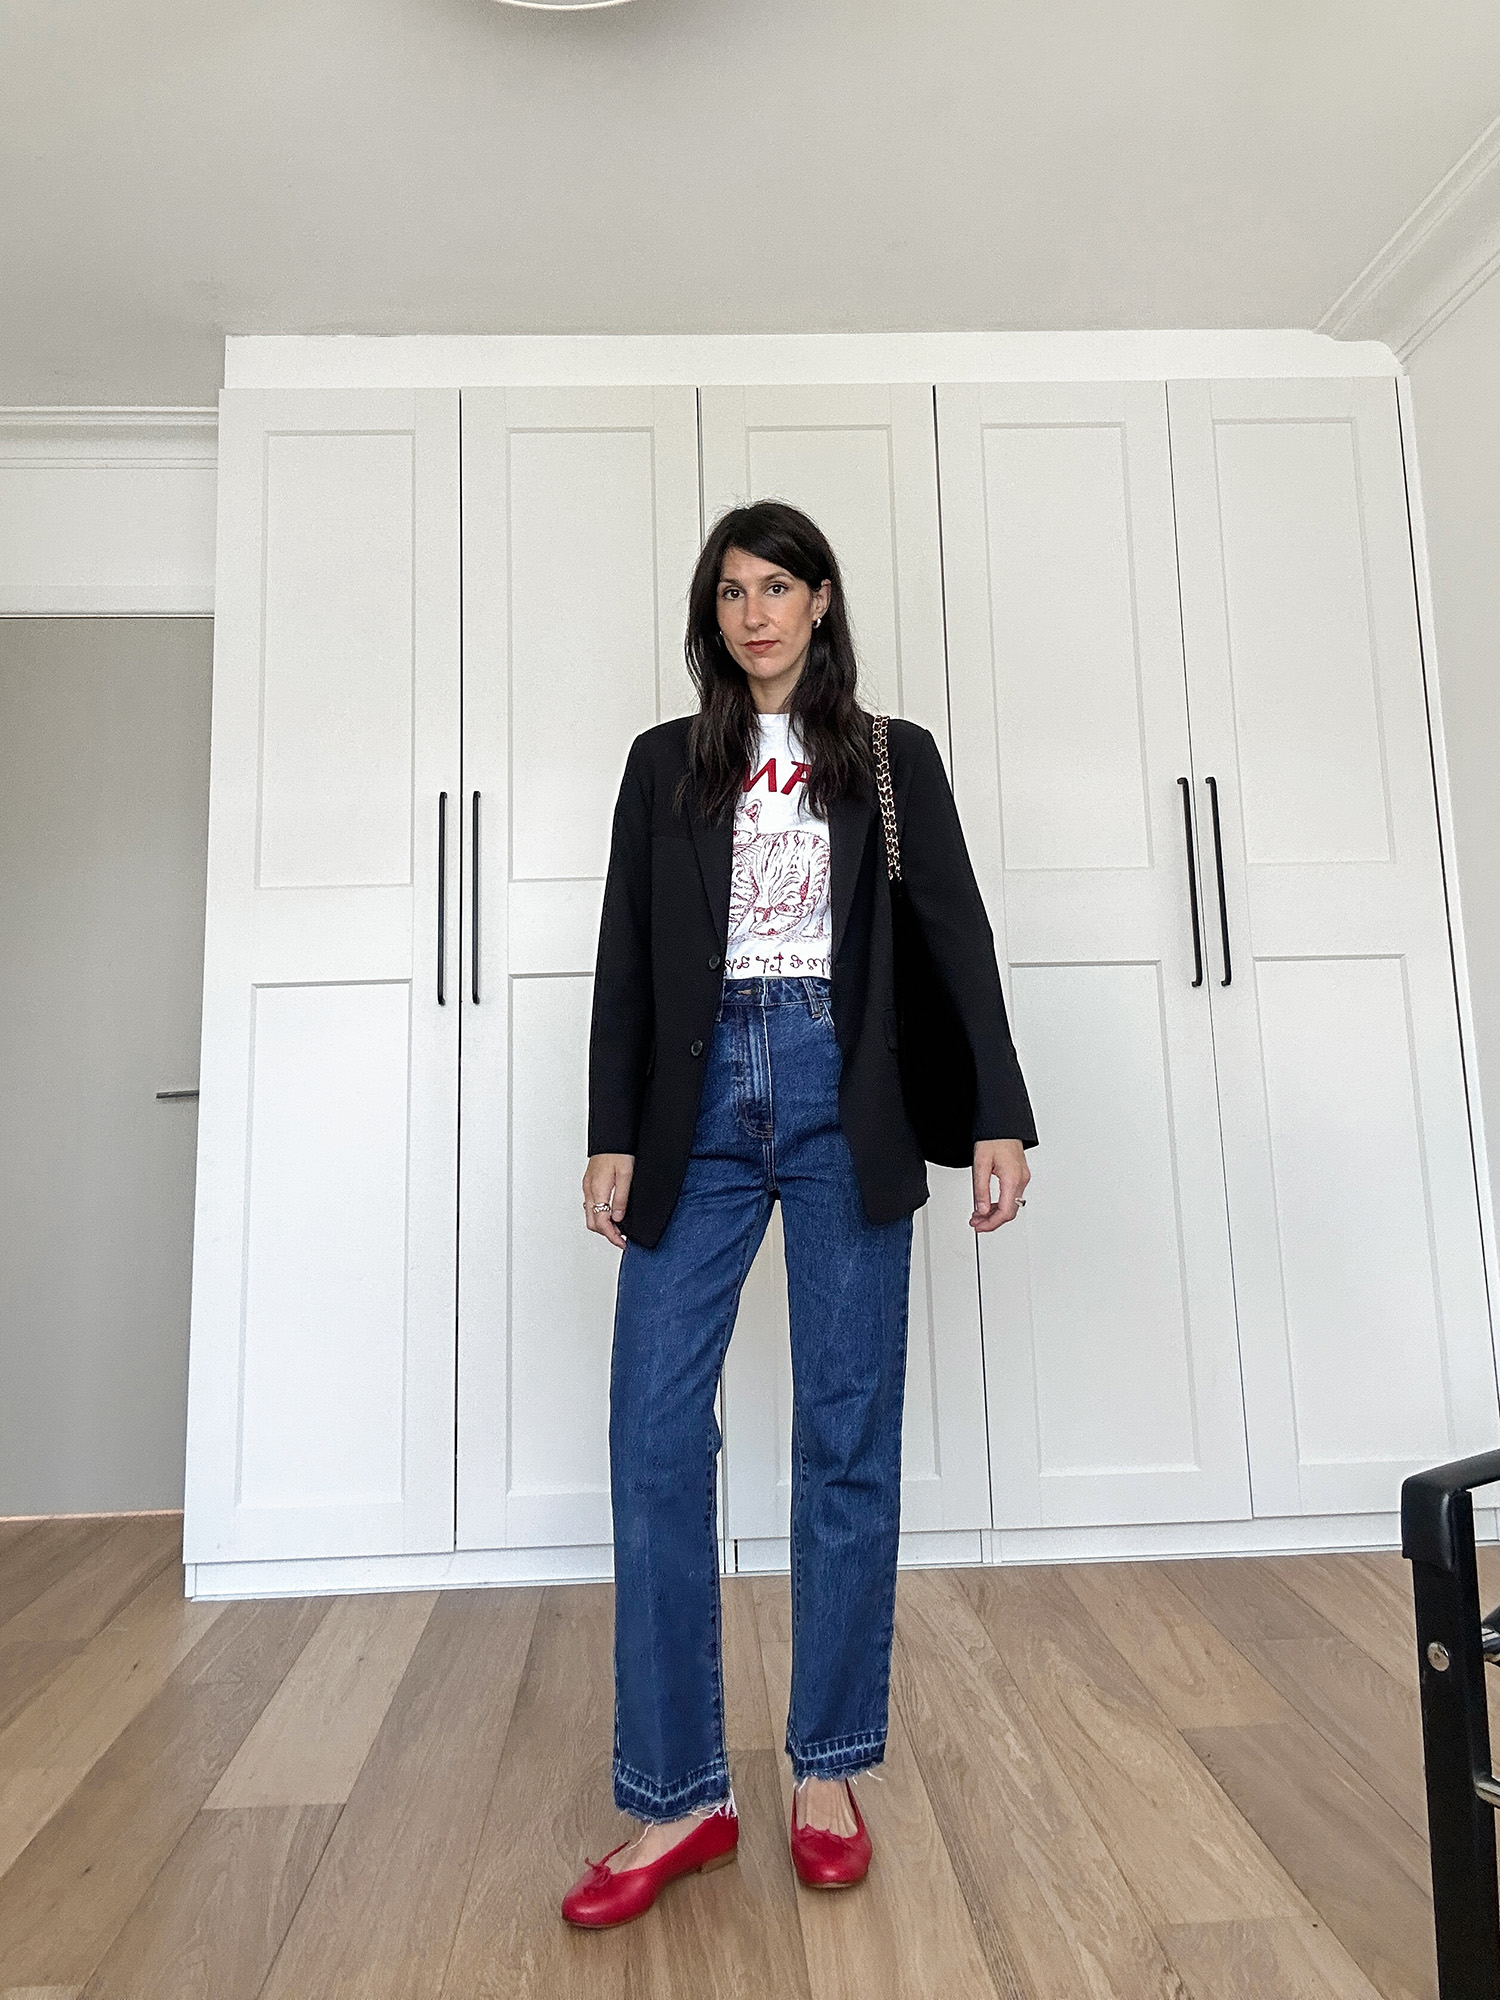 Classic French outfit with blazer and jeans and red ballet flats